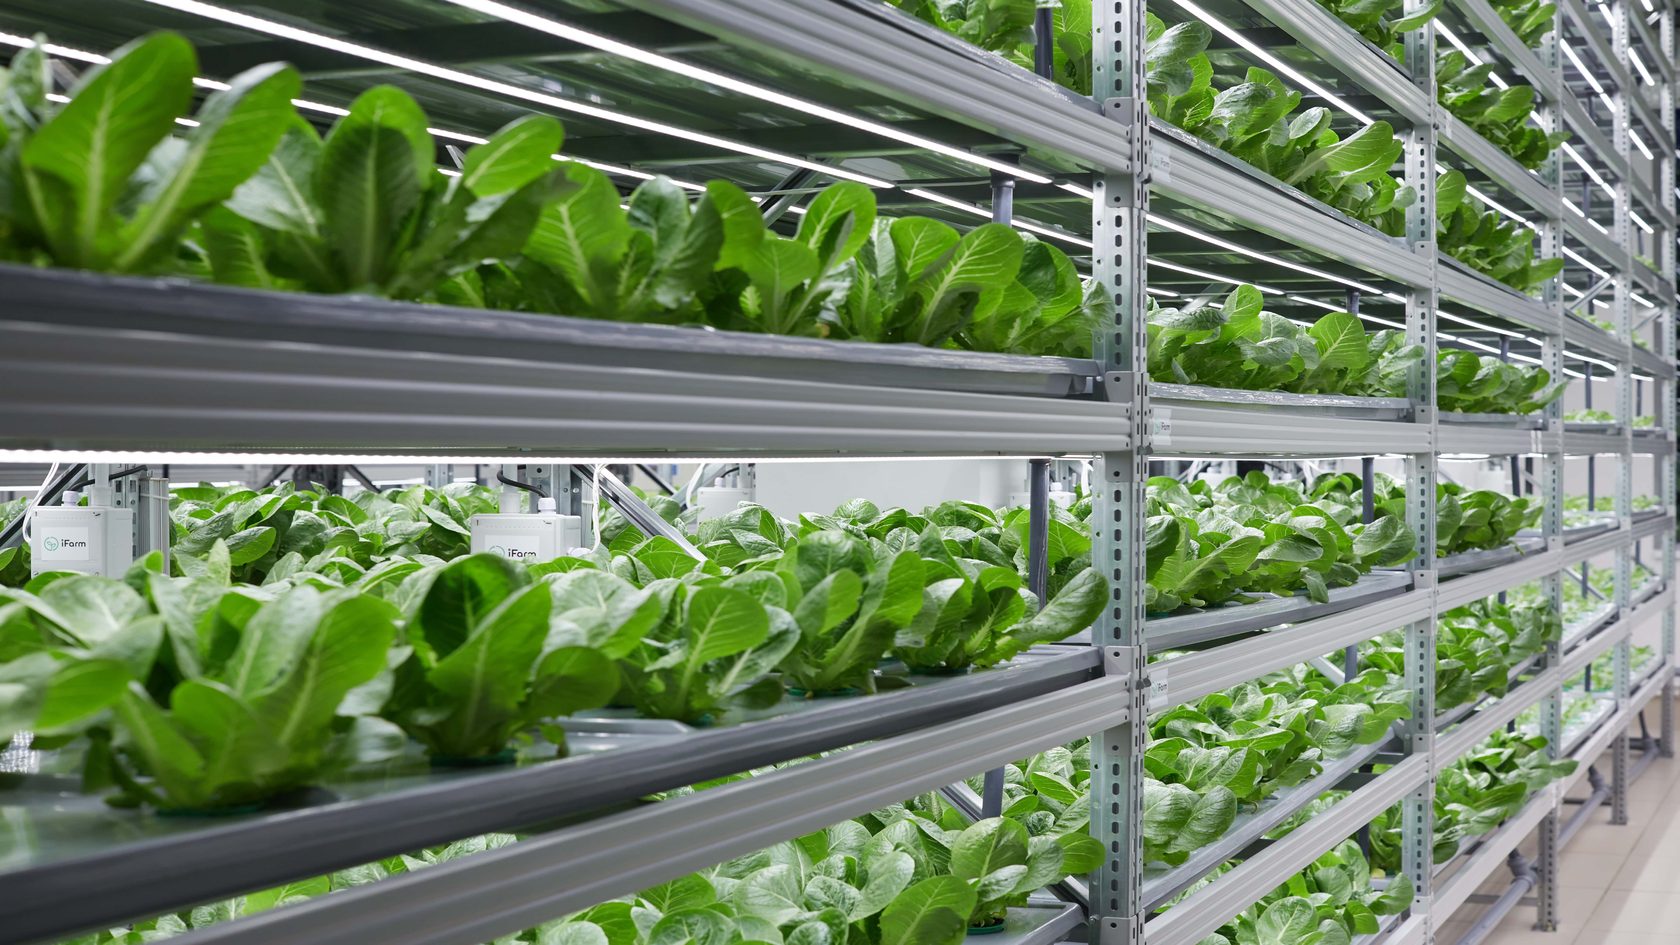 iFarm is included into Indoor Agtech Landscape 2019